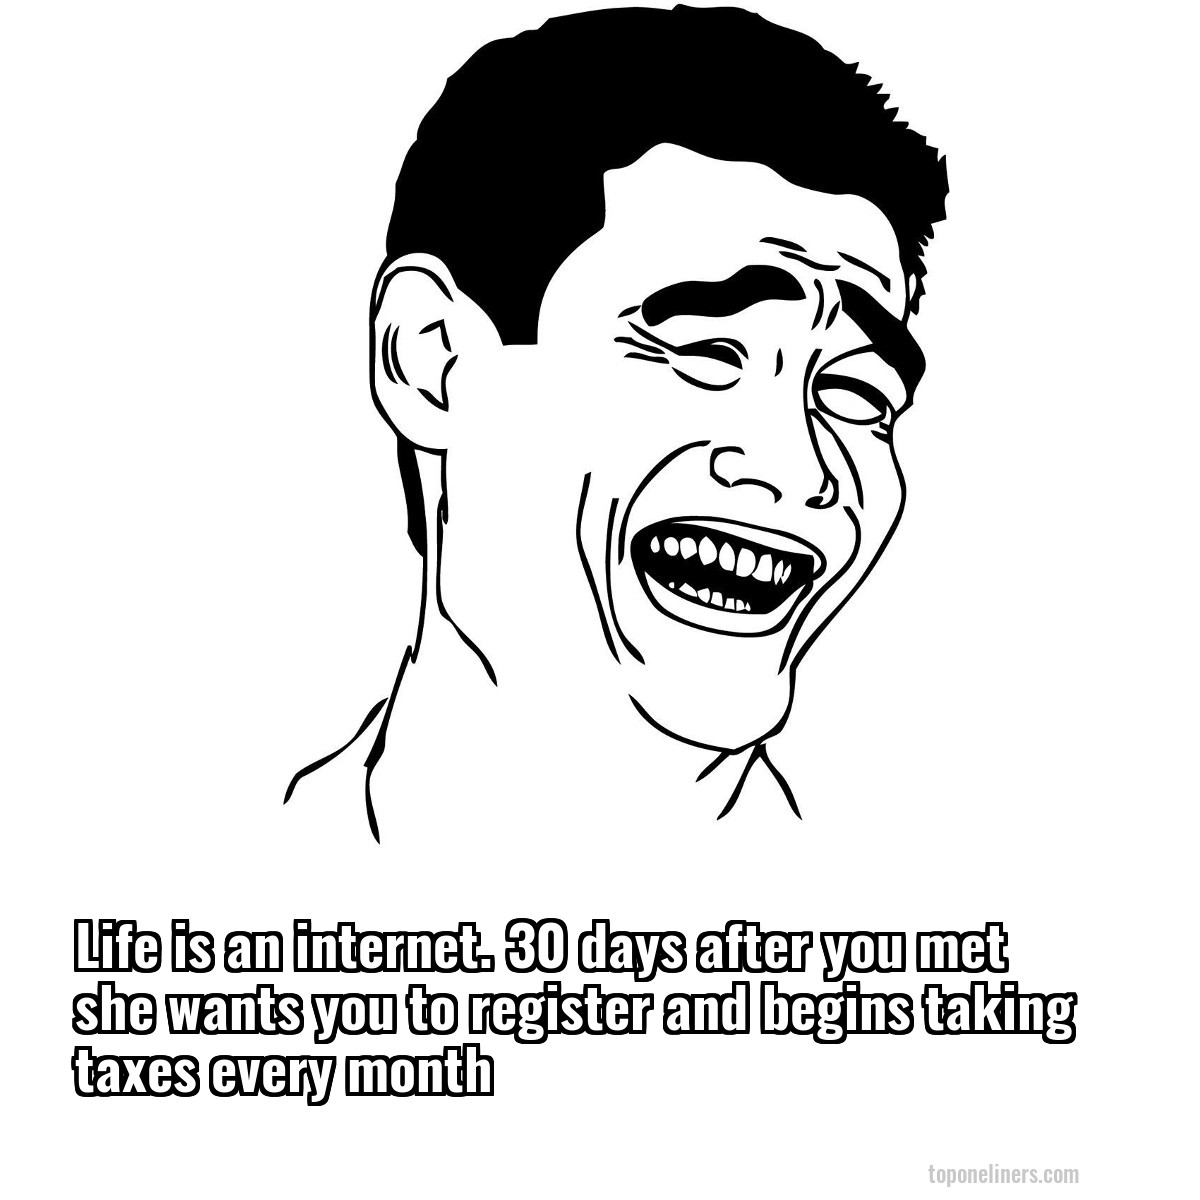 Life is an internet. 30 days after you met she wants you to register and begins taking taxes every month
